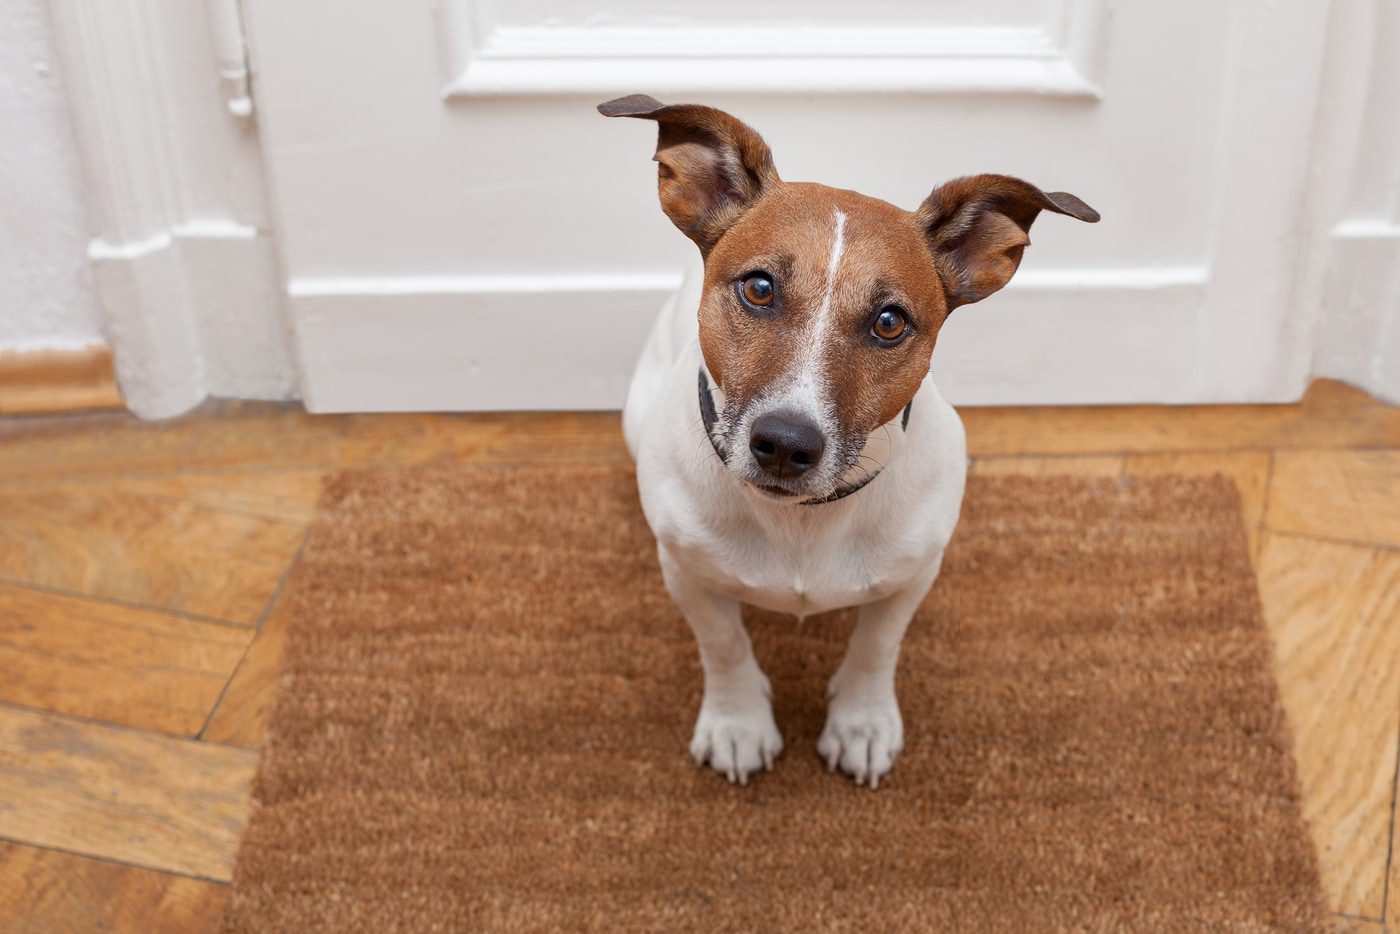 4 tips for toilet training your puppy